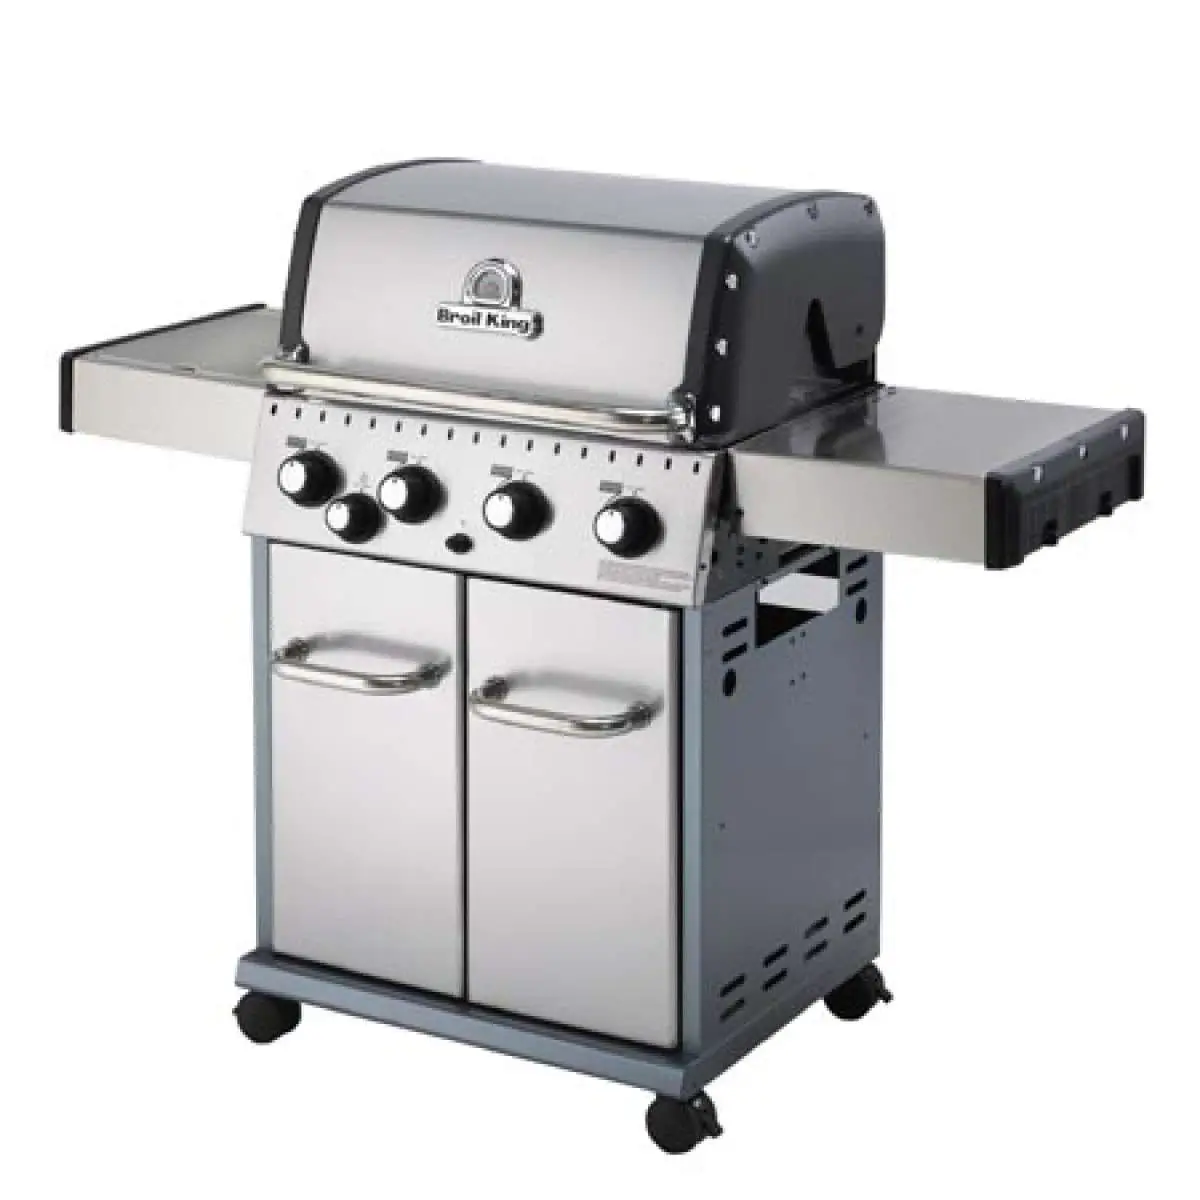 Broil King Baron 320 S Natural Gas Barbecue Grill